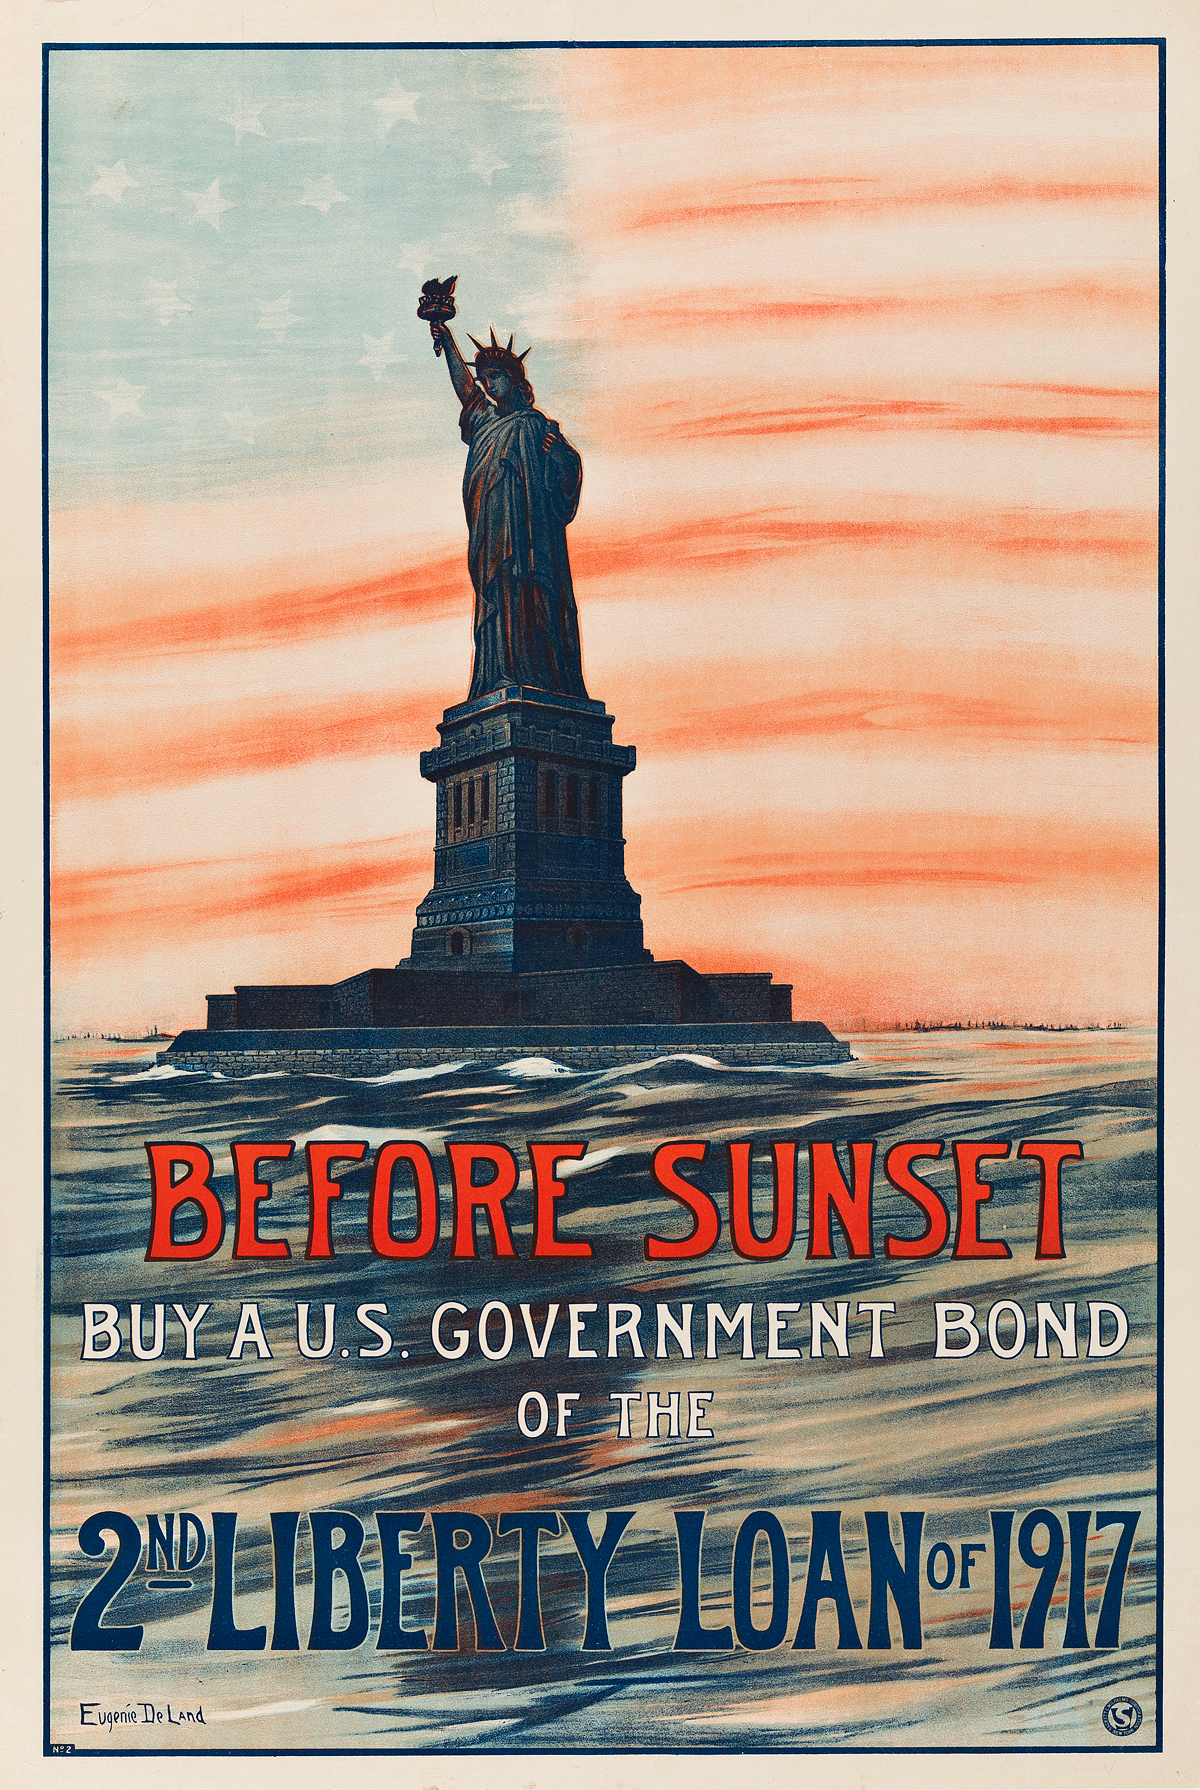 EUGENIE DELAND (DATES UNKNOWN). BEFORE SUNSET / BUY A U.S. GOVERNMENT BOND OF THE 2ND LIBERTY LOAN OF 1917. 1917. 29x19 inches, 75x50 c